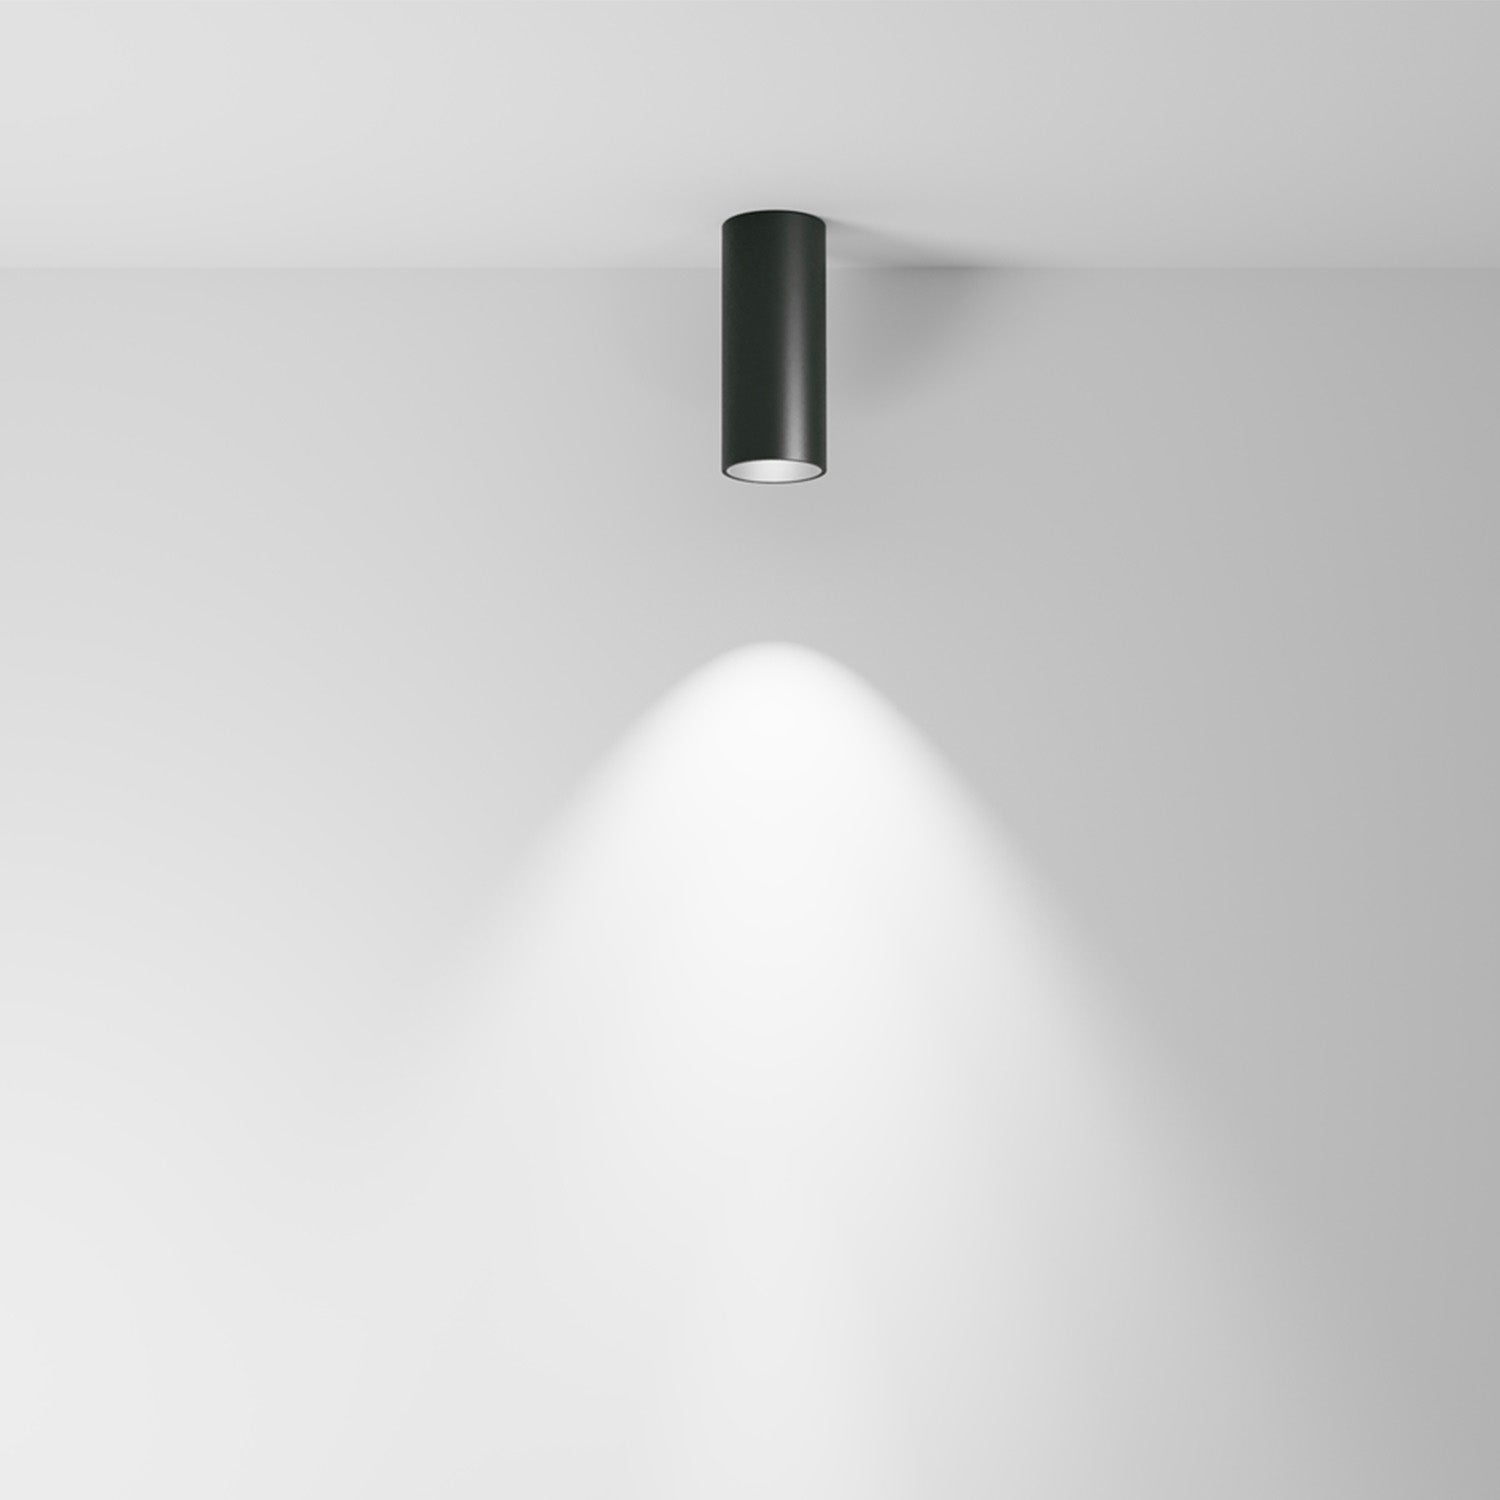 FOCUS LED - Surface-mounted spotlight in black or white aluminum with integrated LED